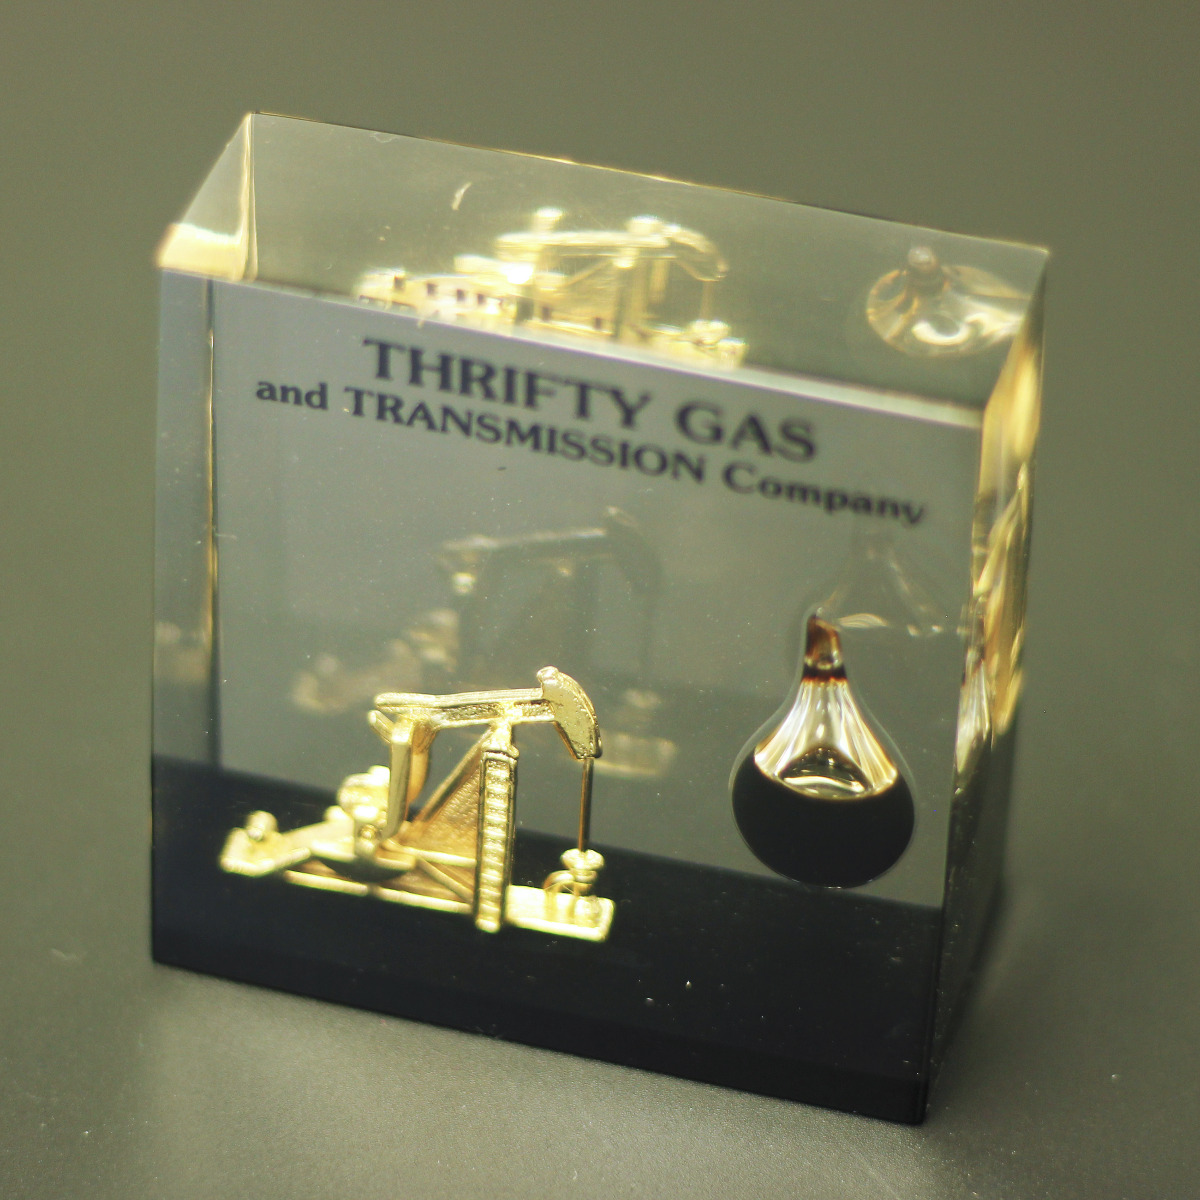 Dual custom cast replica of oil rig and oil encapsulated in glass embedment bespoke award